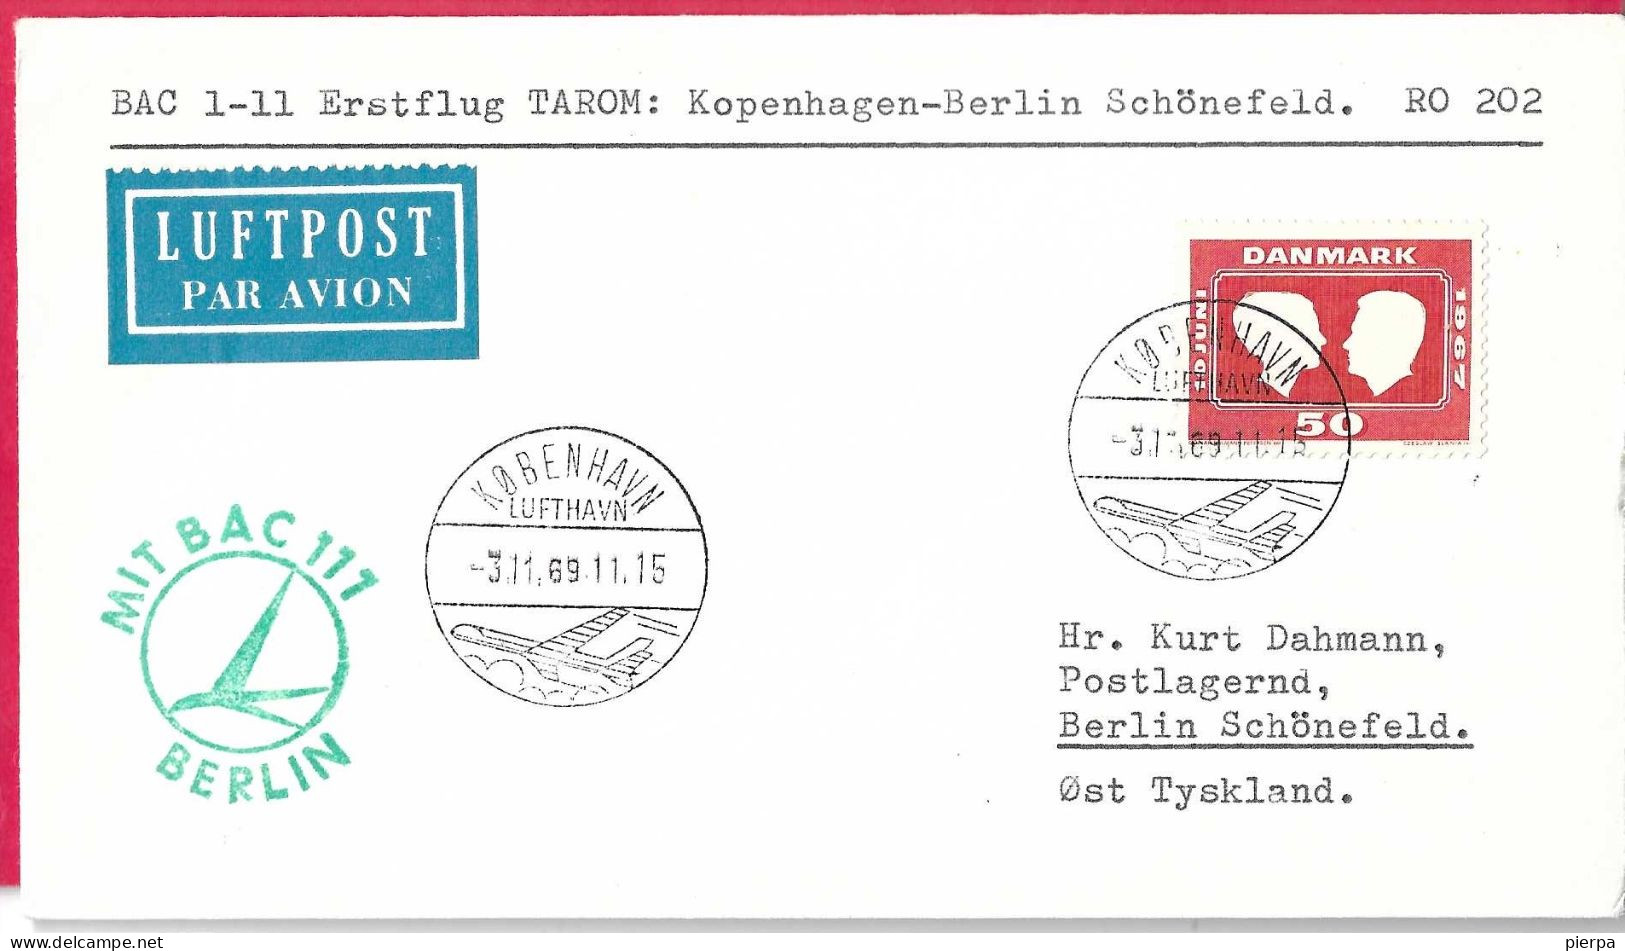 DANMARK - FIRST FLIGHT TAROM WITH BAC 117 FROM KOBENHAVN TO BERLIN/SCHONEFELD *3.11.69* ON OFFICIAL COVER - Airmail